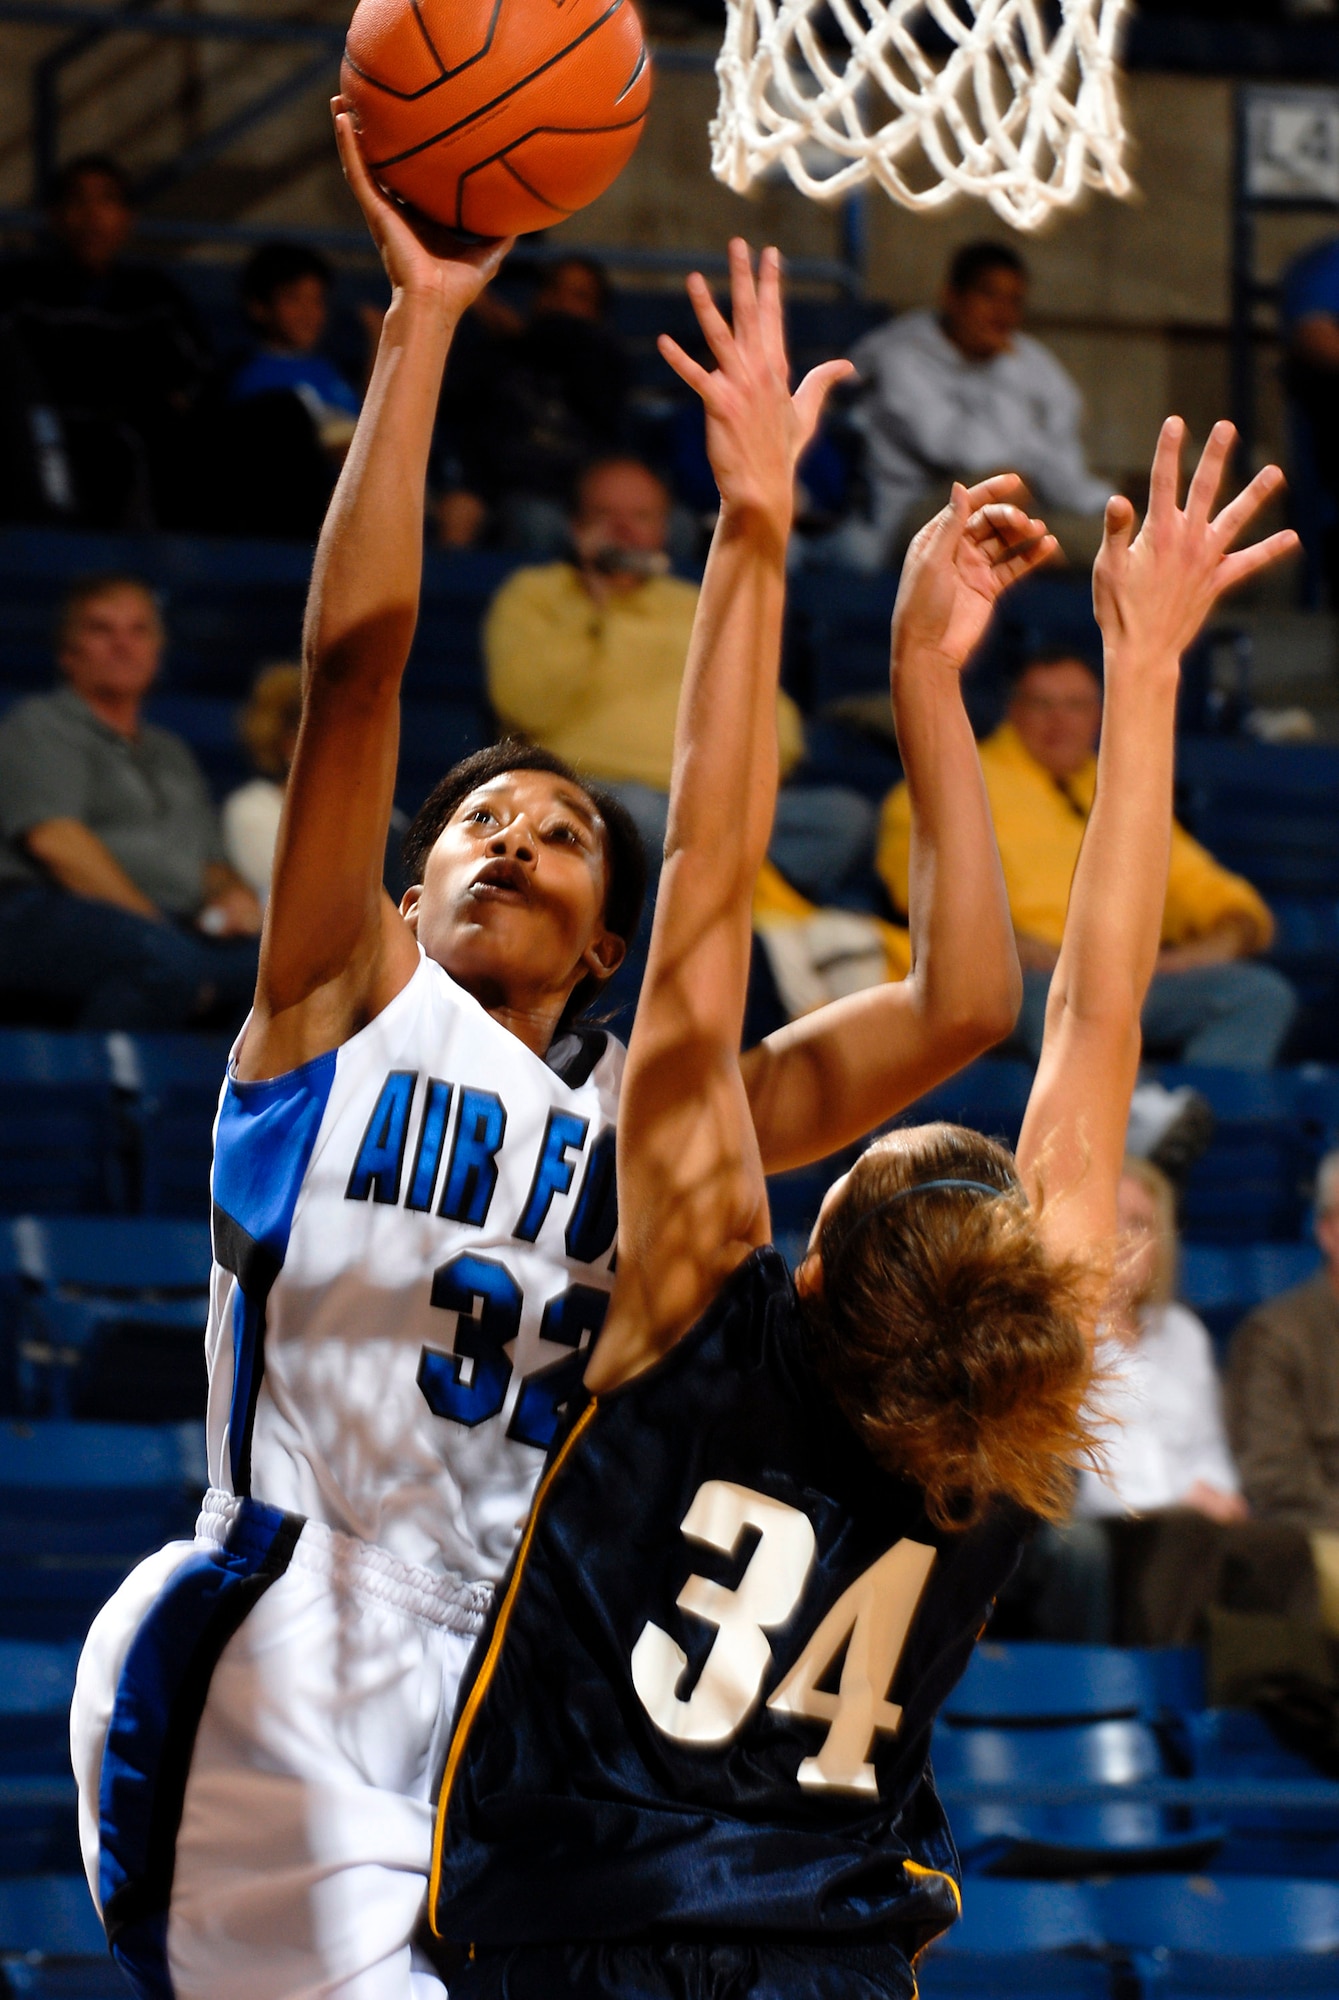 Air Force Academy senior forward Alecia Steele goes  for a lay up above Regis University's Luaren Luebbe during the Falcons'  89-52 exhibition victory Nov. 3 at the Academy's Clune Arena. Steele had a game-high  23 points and 17 rebounds. Air Force opens its regular season Nov. 9 at Oklahoma State. (U.S. Air Force photo/Lewis Carlyle)